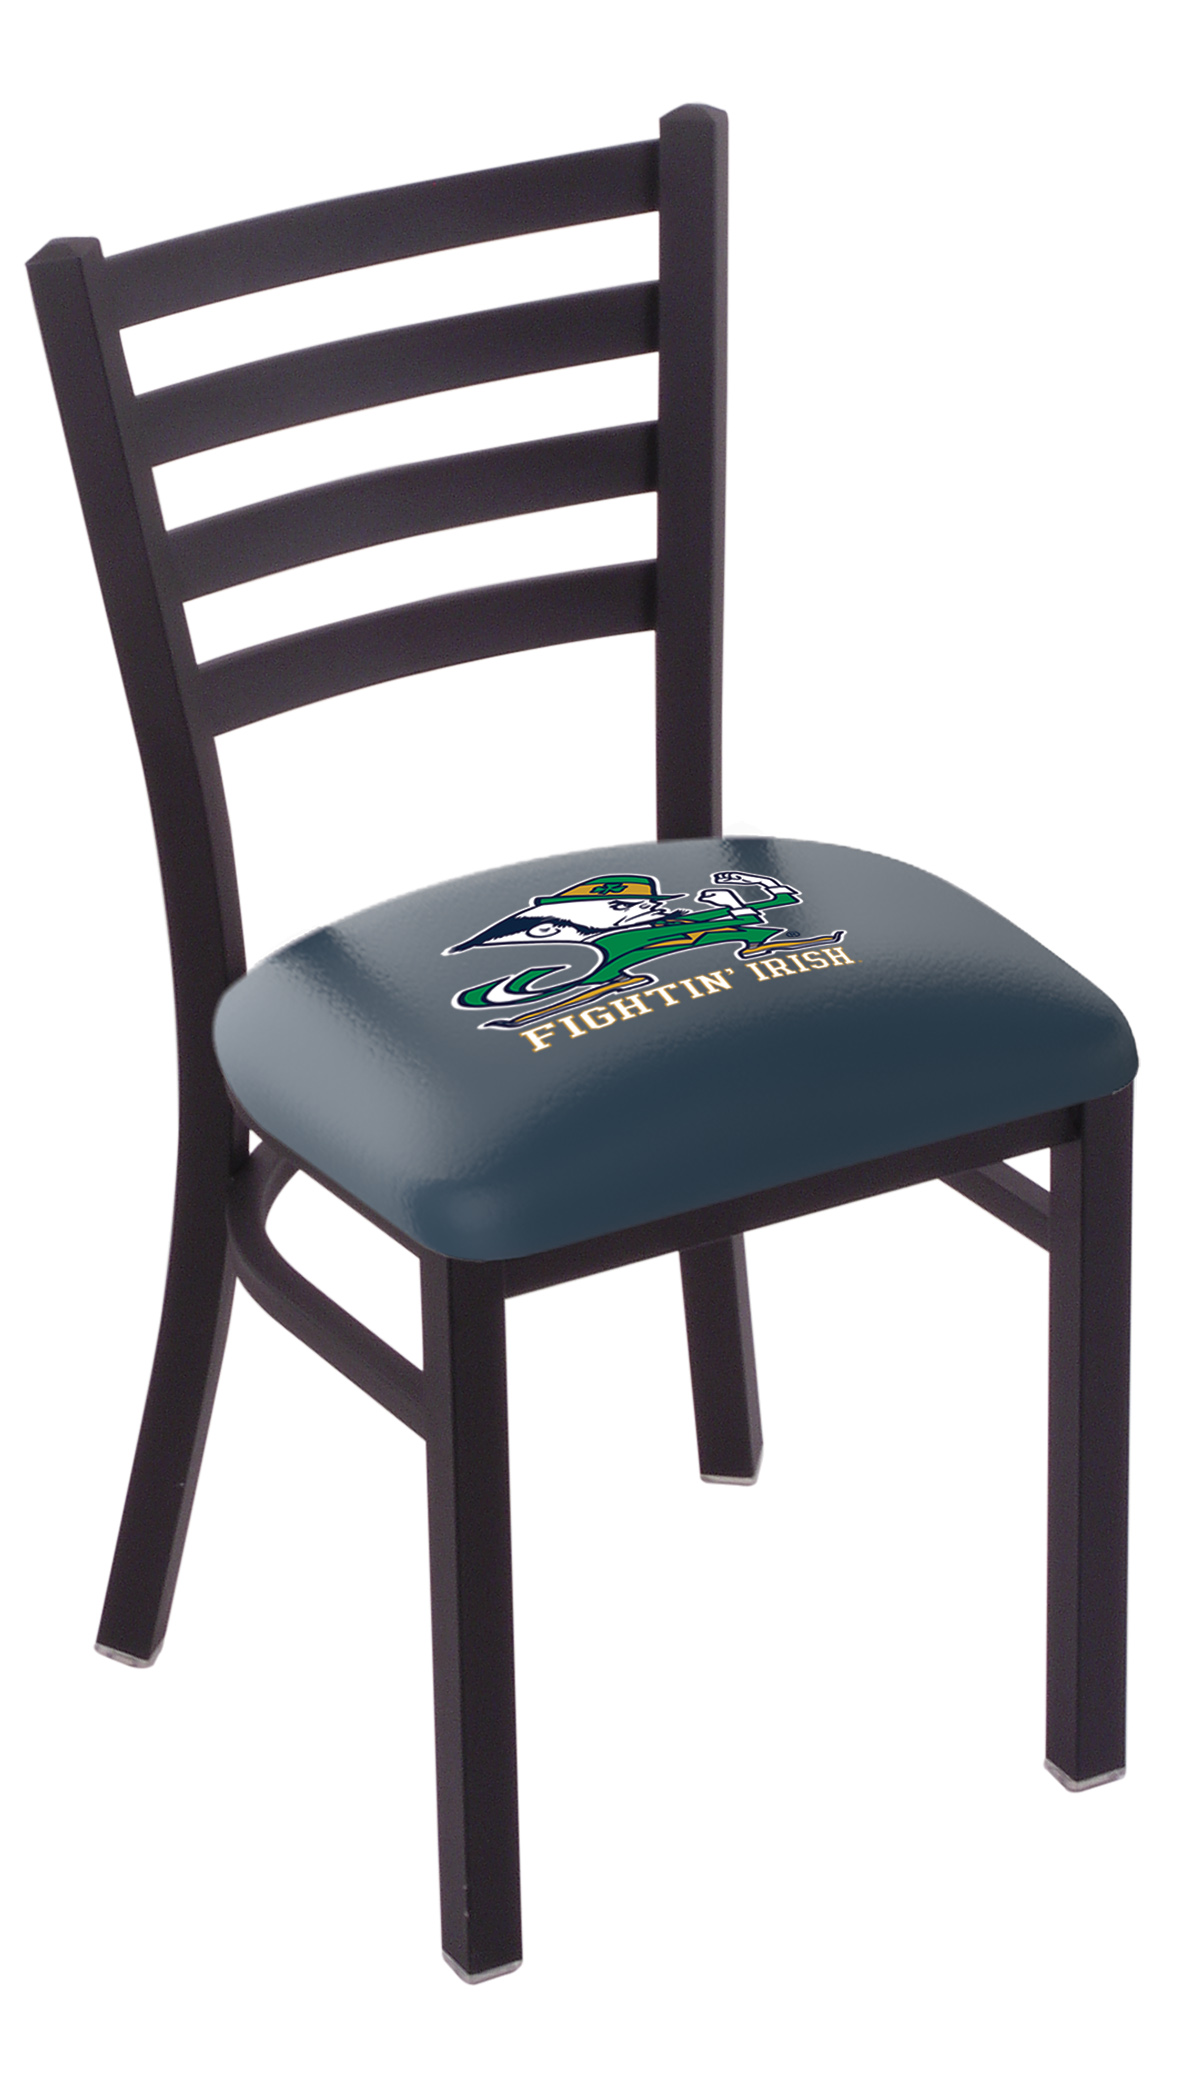 Picture of Holland Bar Stool L00418ND-Lep 18 in. Notre Dame Chair with Fighting Irish Leprechaun Logo